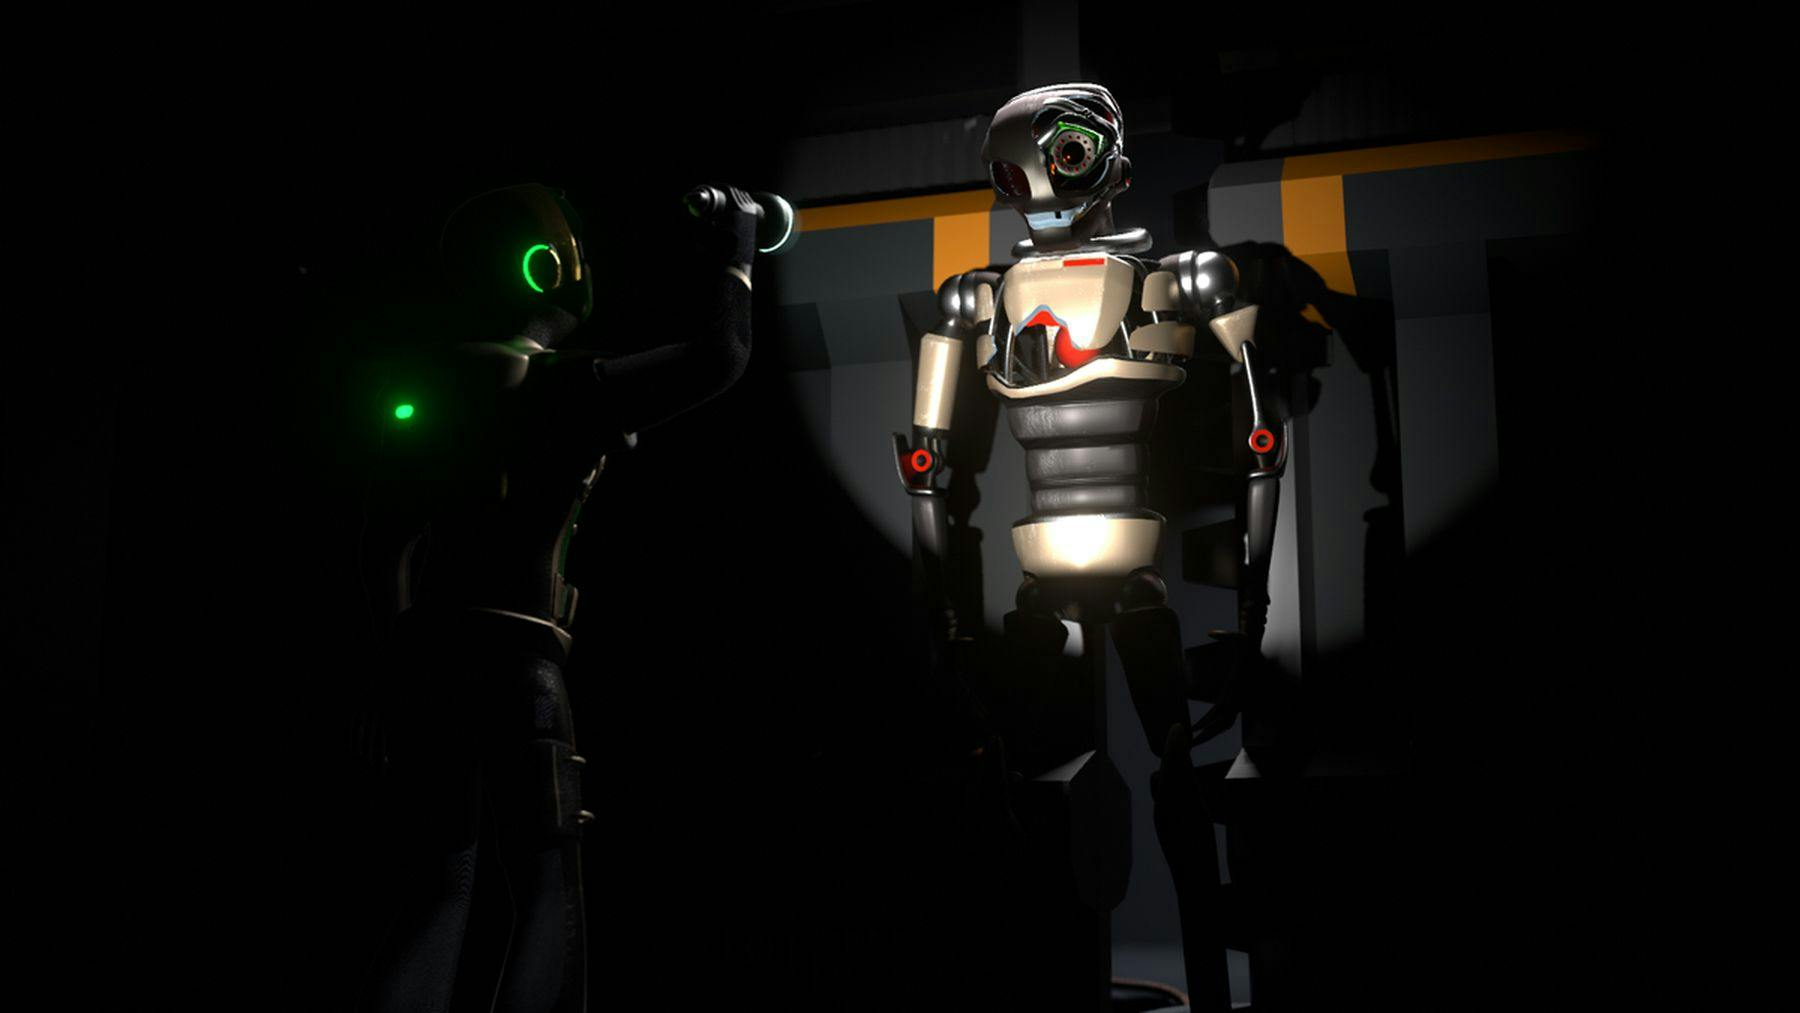 A digital drawing of a robot shining a torch on another robot that is stood against the wall. The torchlight spotlights the robot and shows their outer shell which is silver and black.